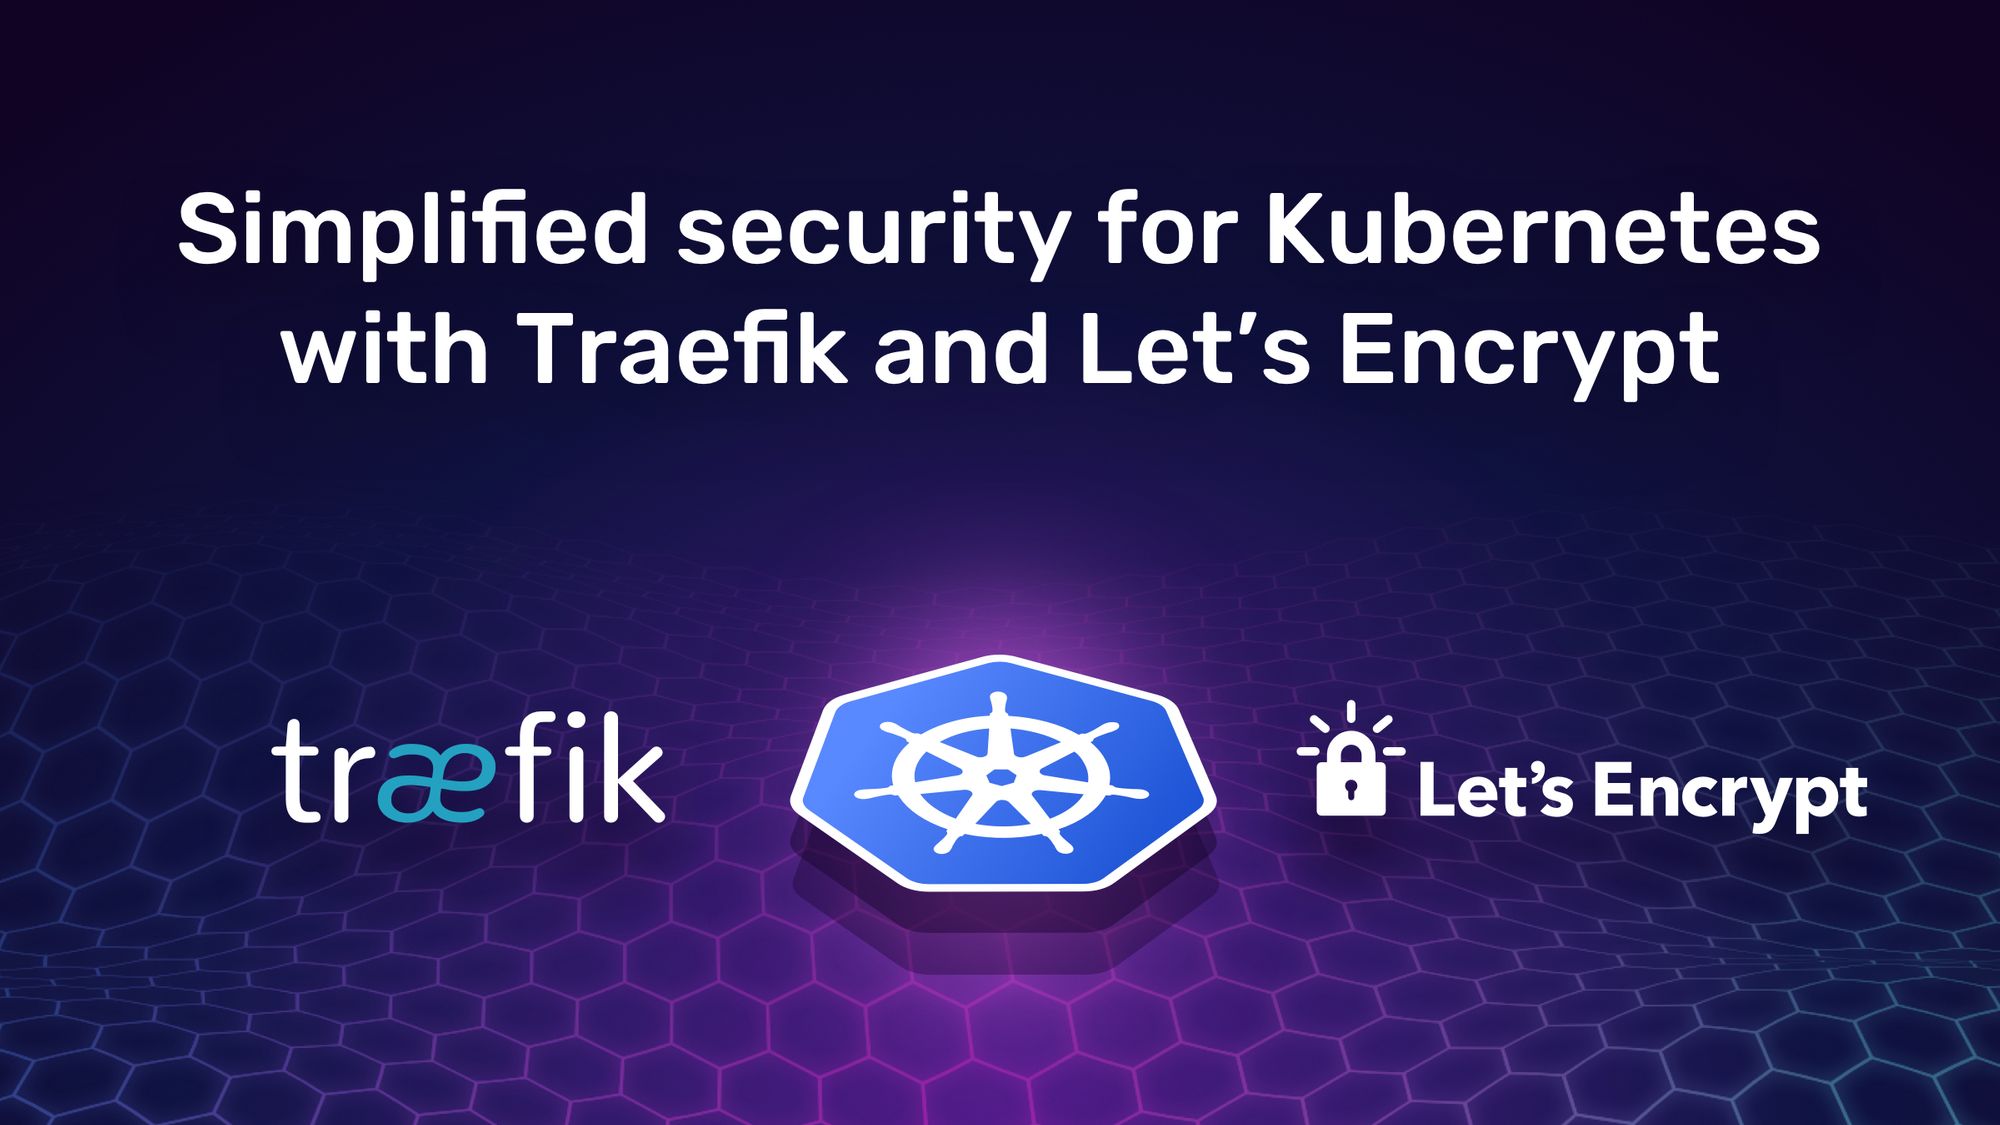 Simplified security for Kubernetes with Traefik and Let's Encrypt